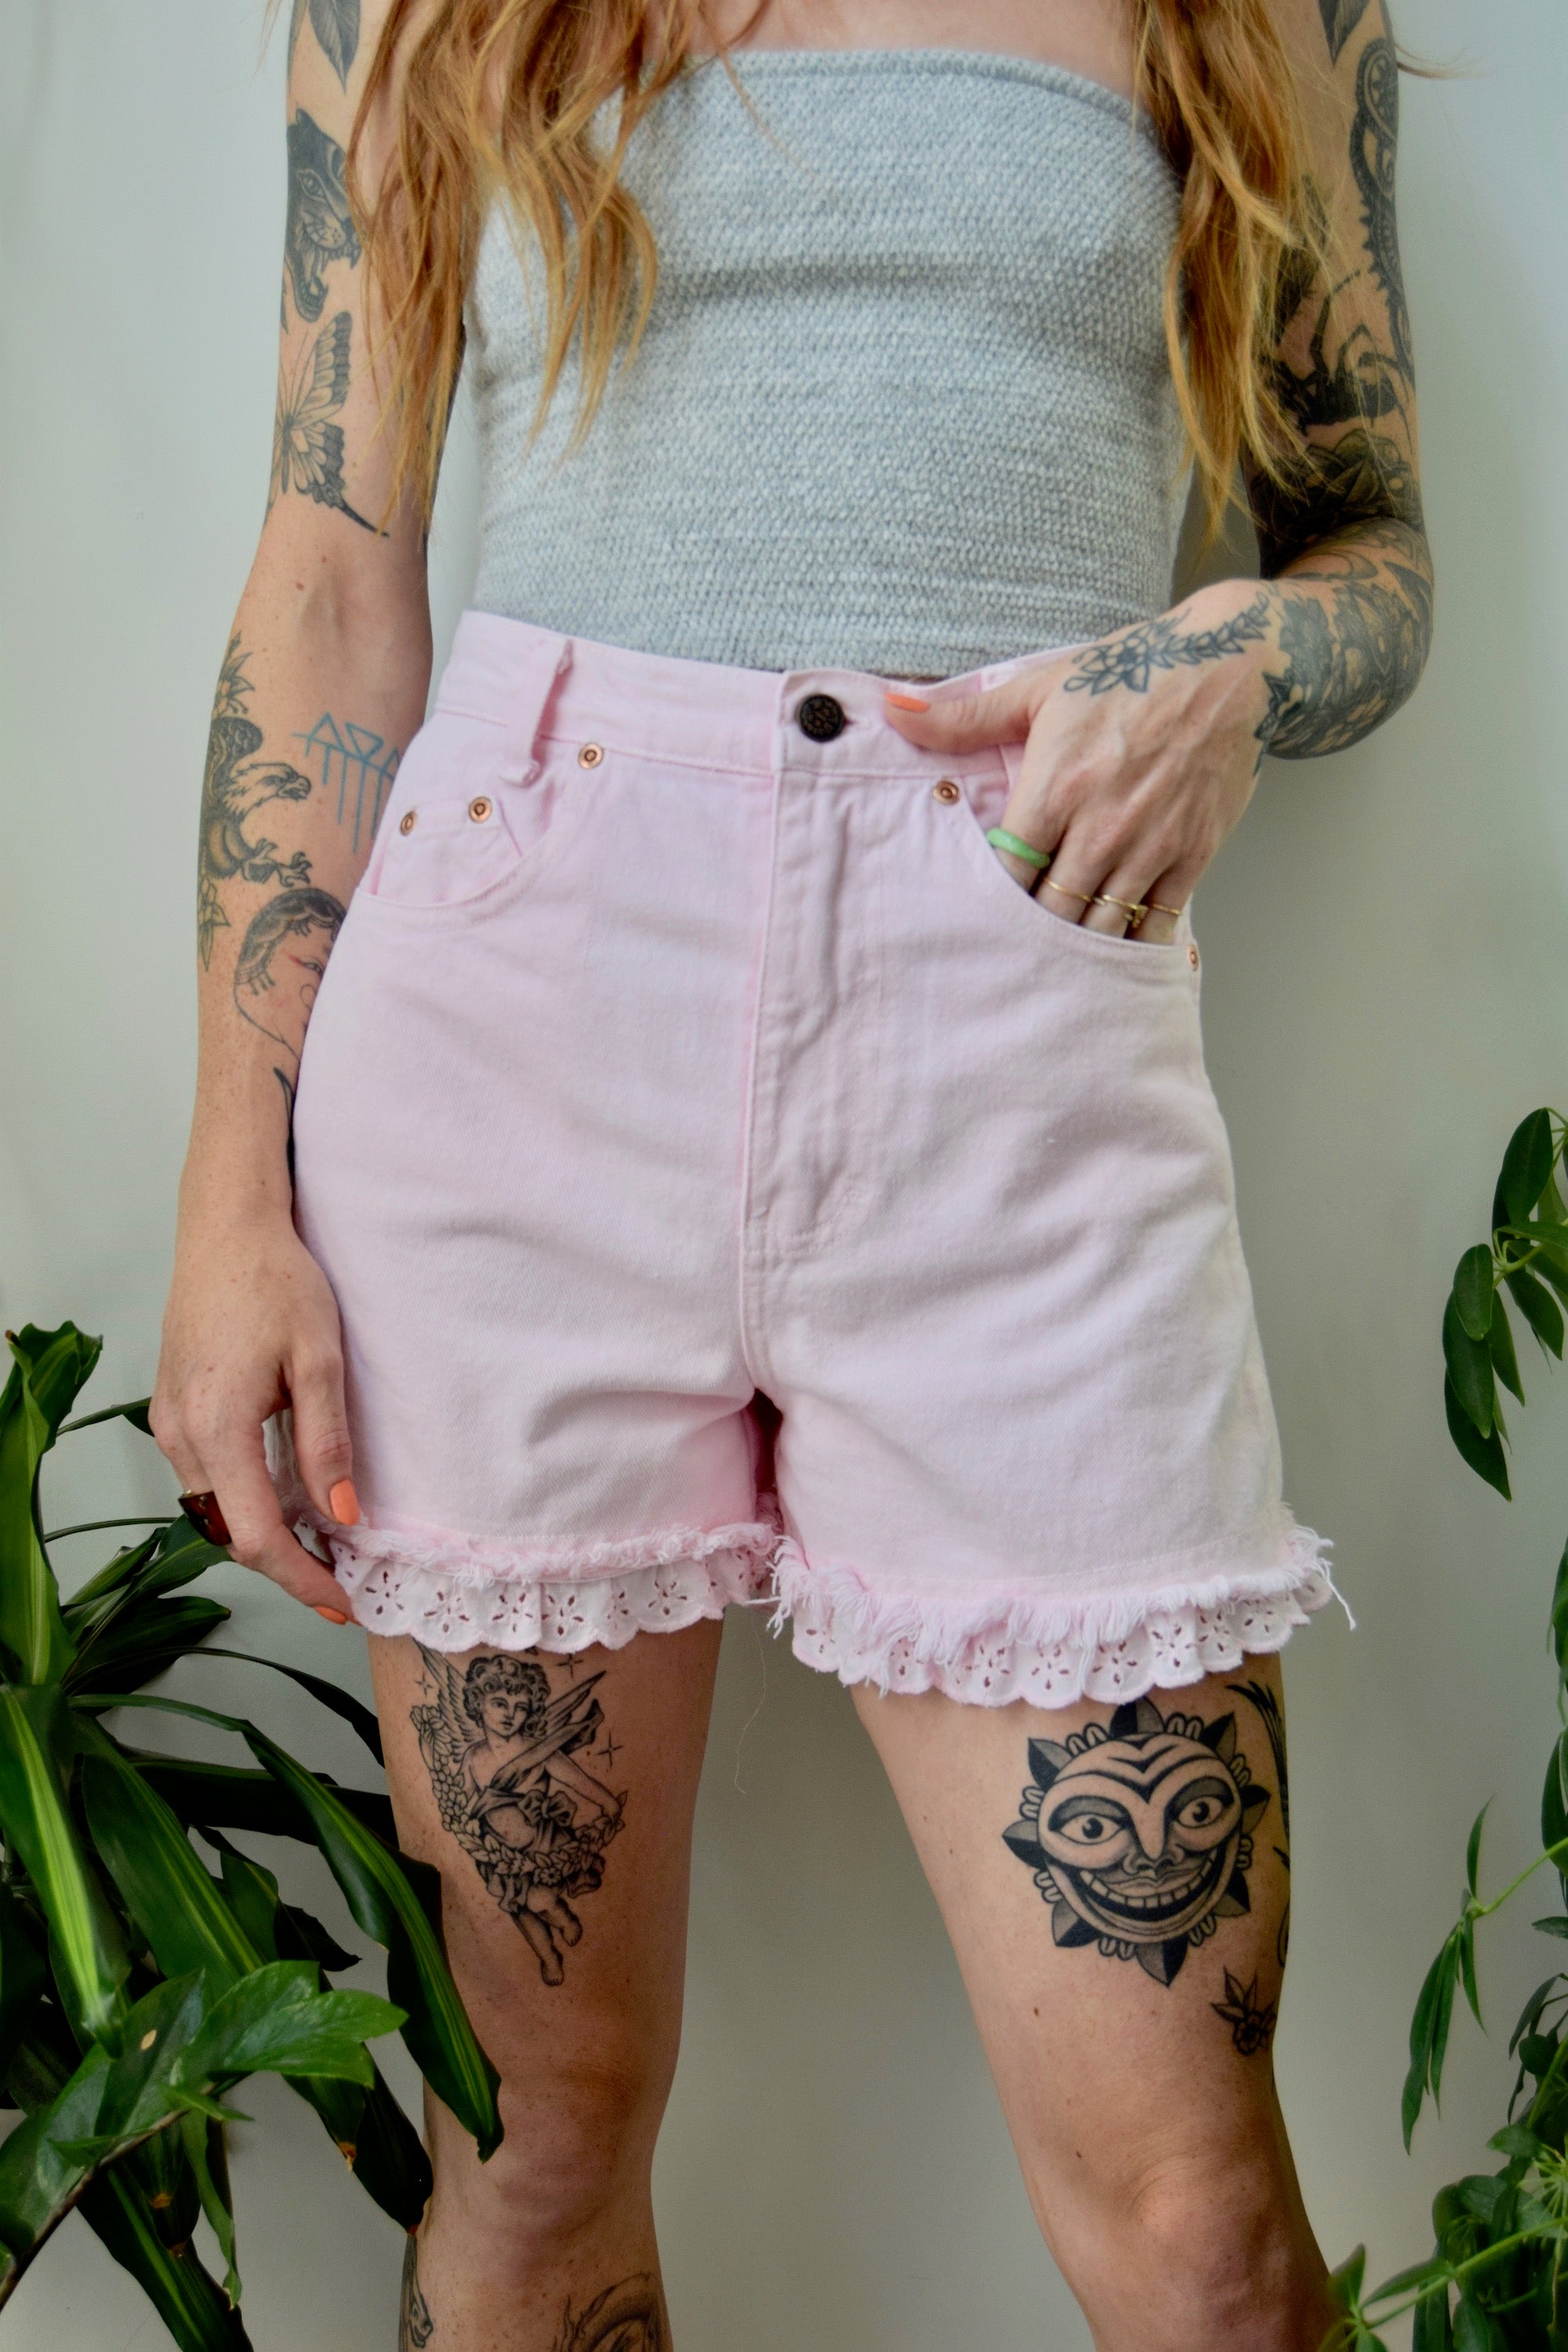 Baby Pink Lace Shorts